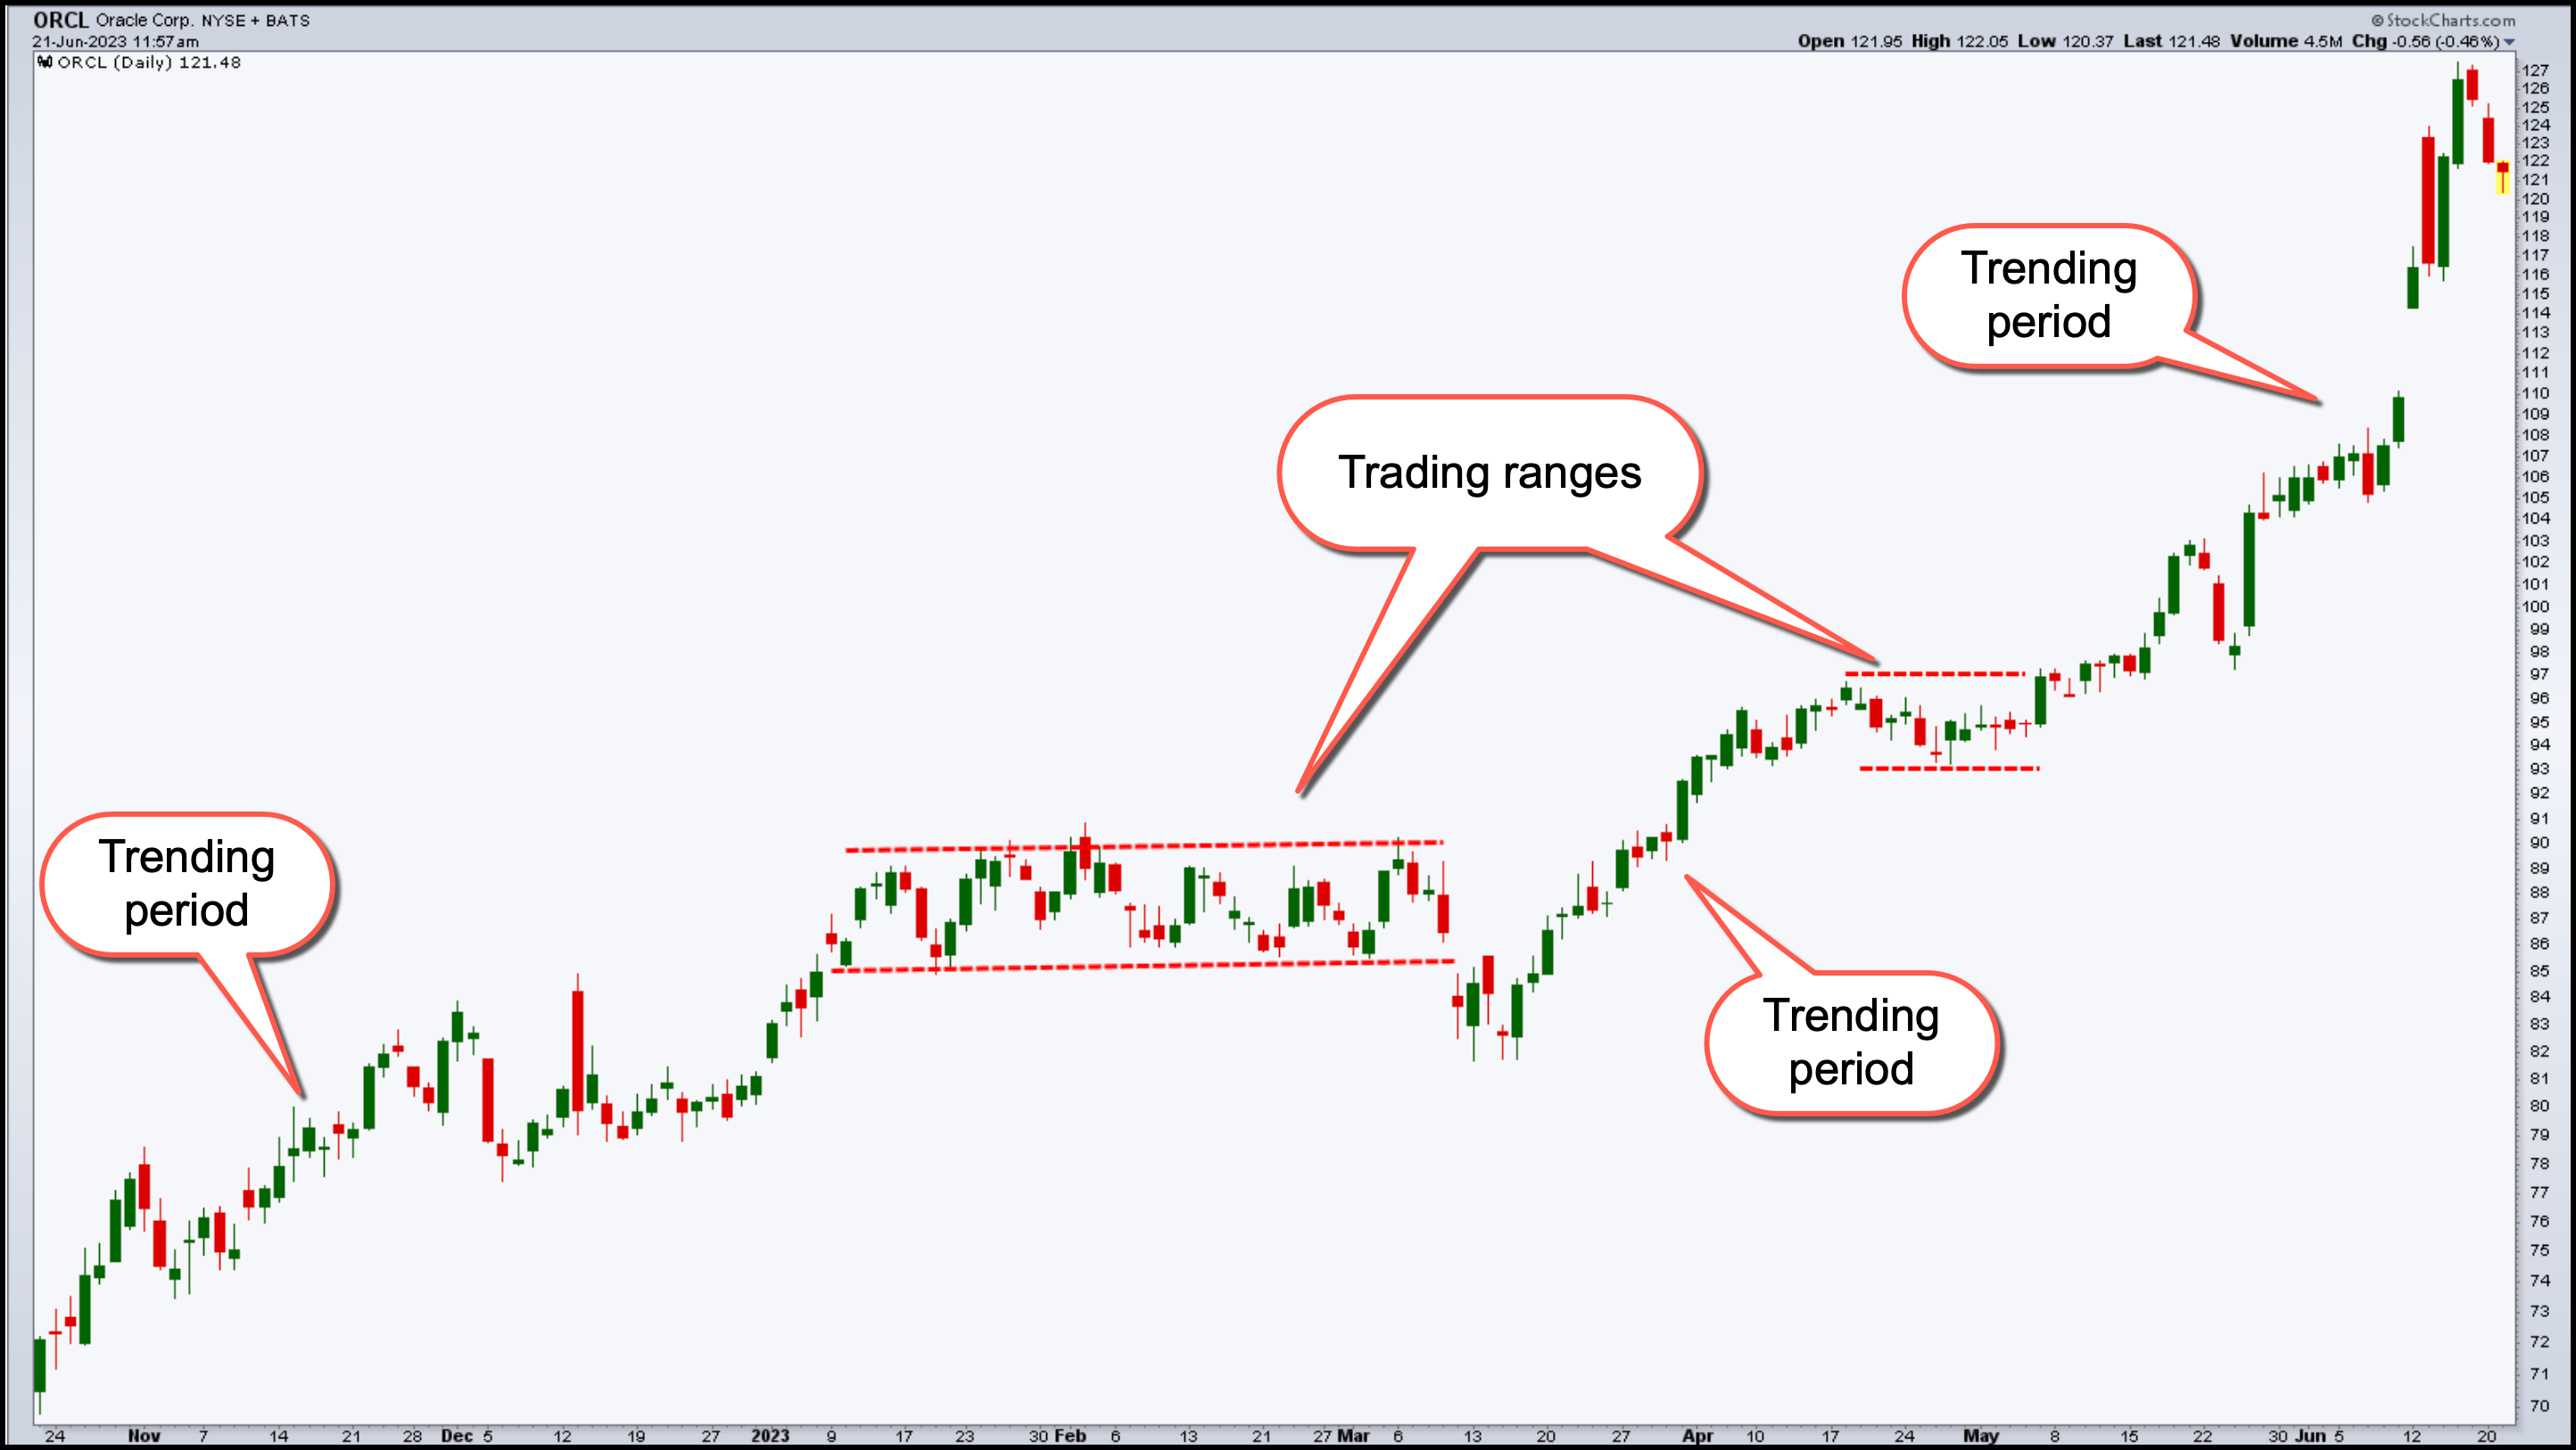 Trending and trading ranges in Oracle (ORCL) example chart from StockCharts.com